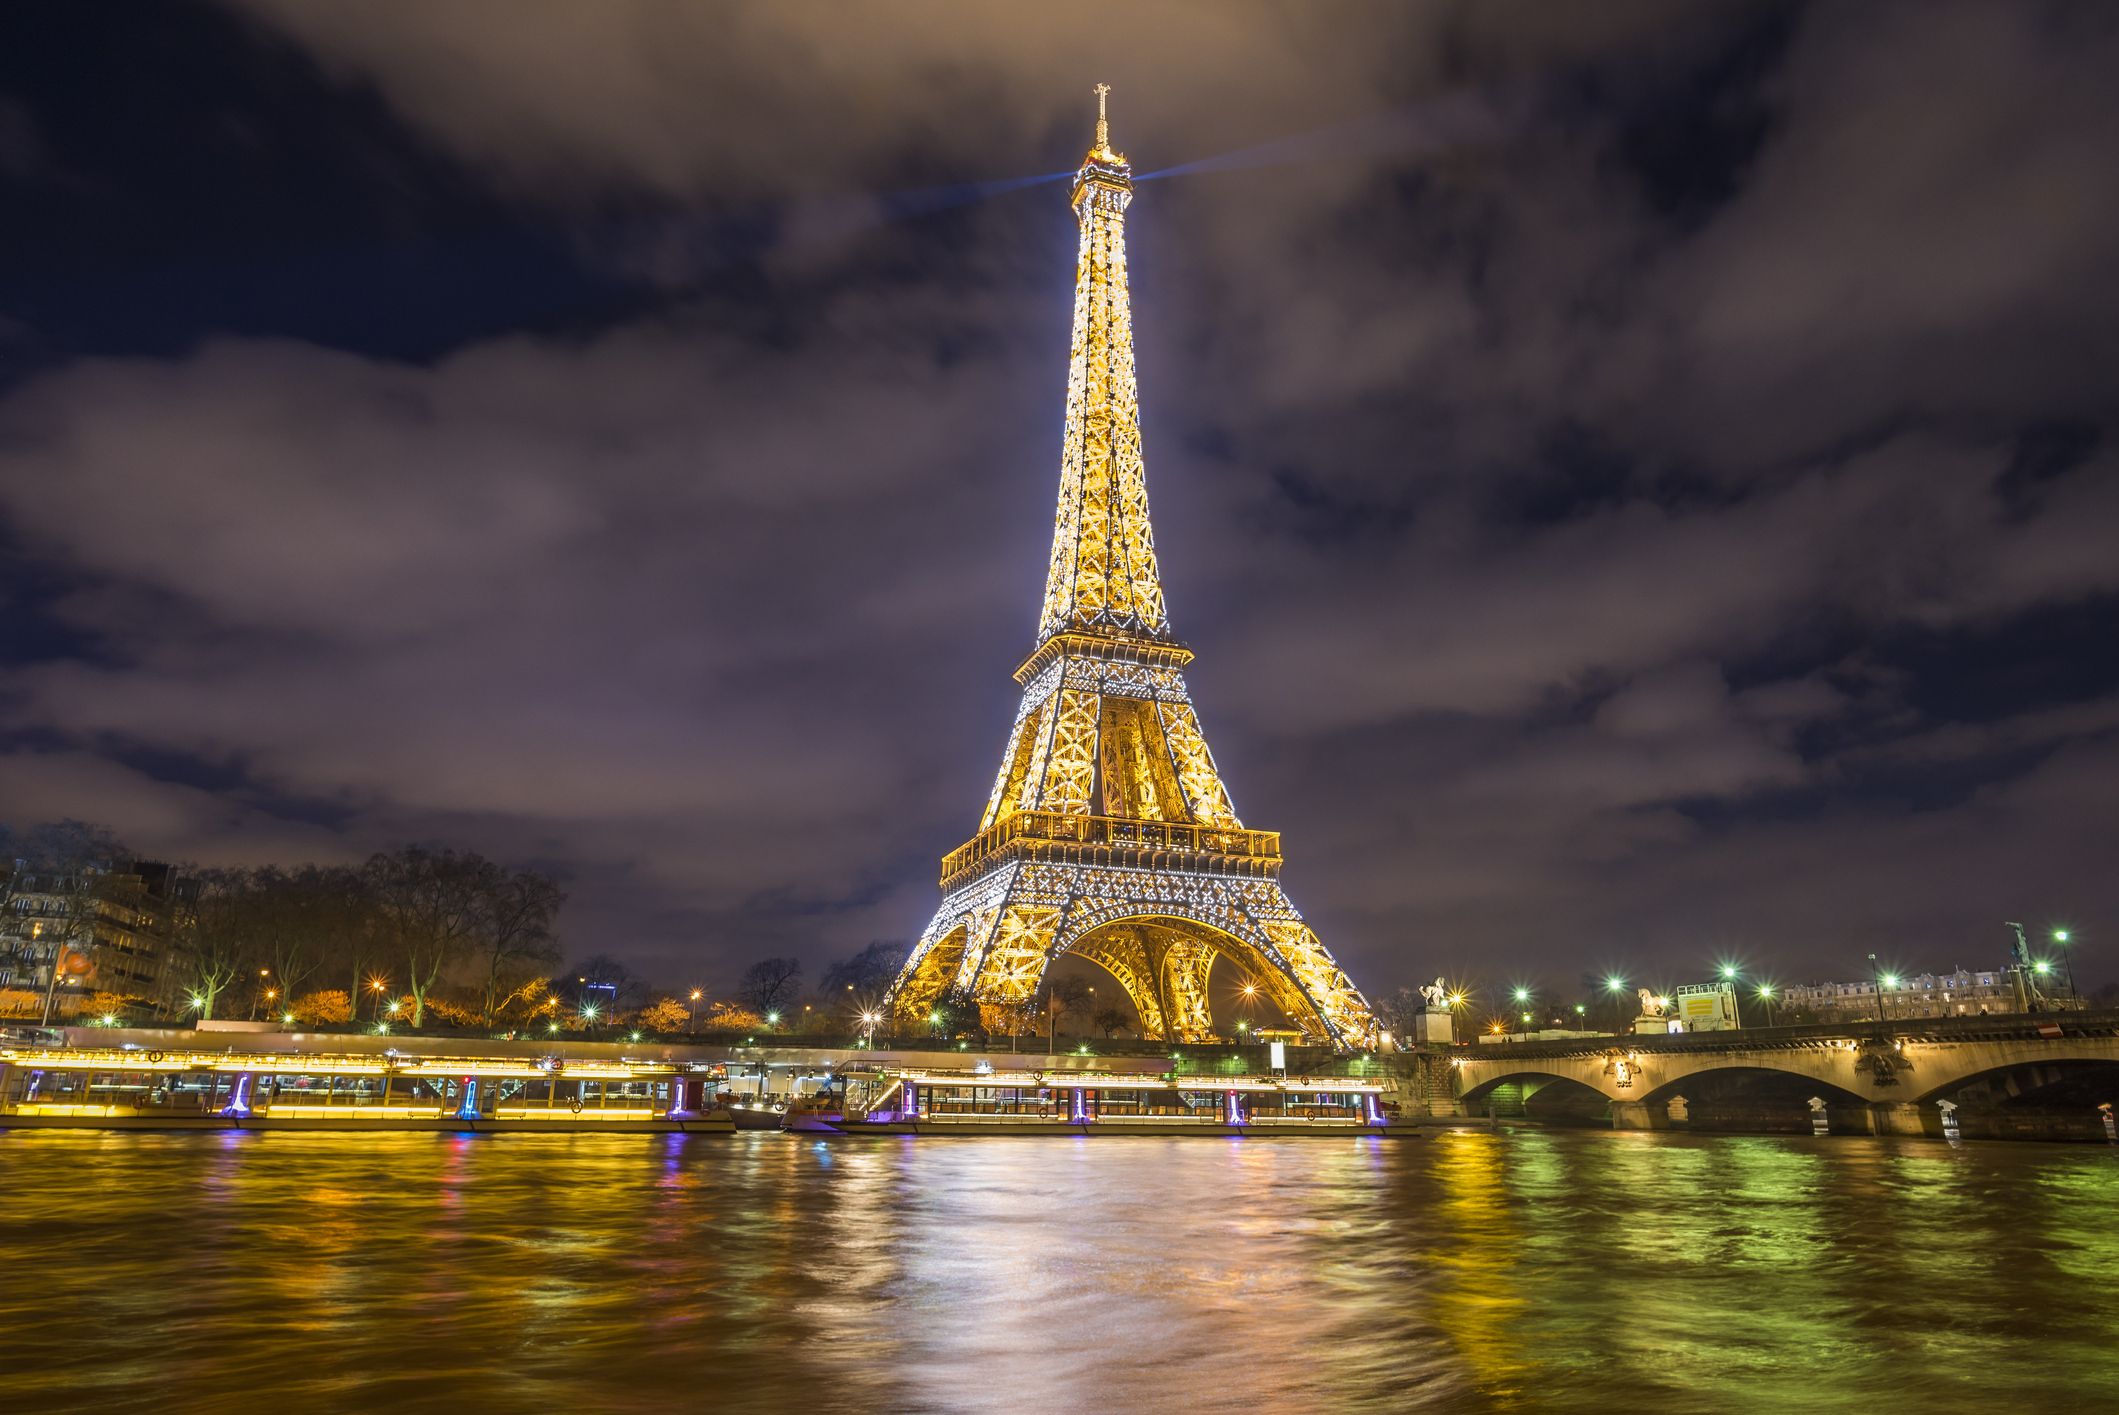 Lights the Tower for Sale - How to Buy a Lightbulb from the Eiffel Tower